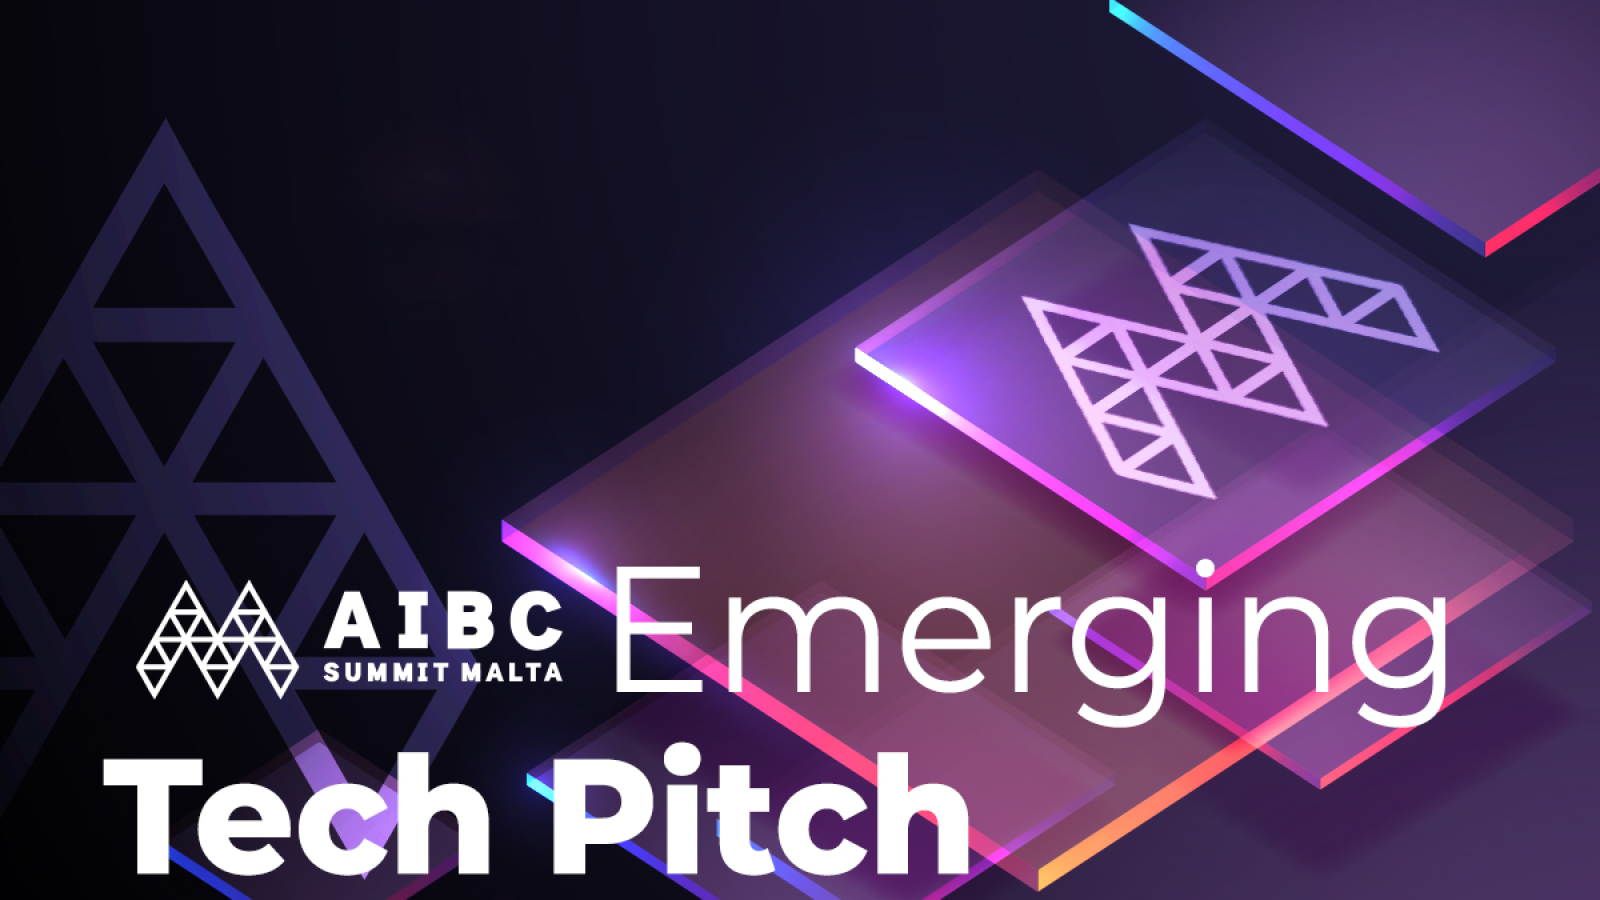 Emerging Tech Pitch returns to the stage in 2020!